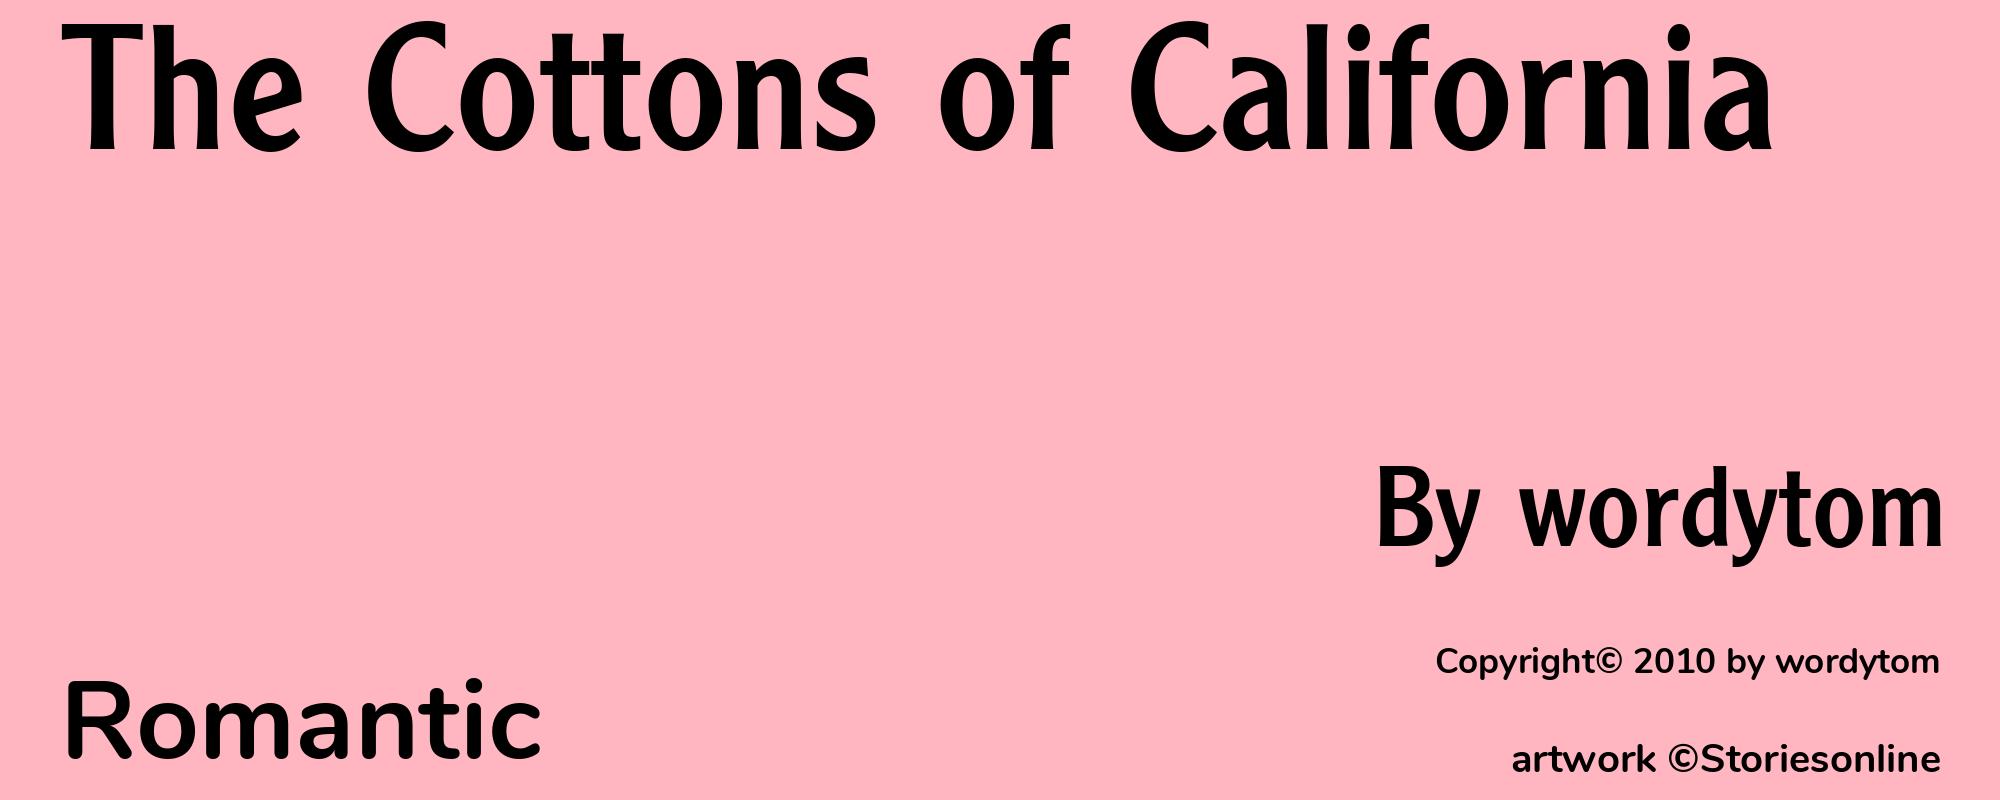 The Cottons of California - Cover